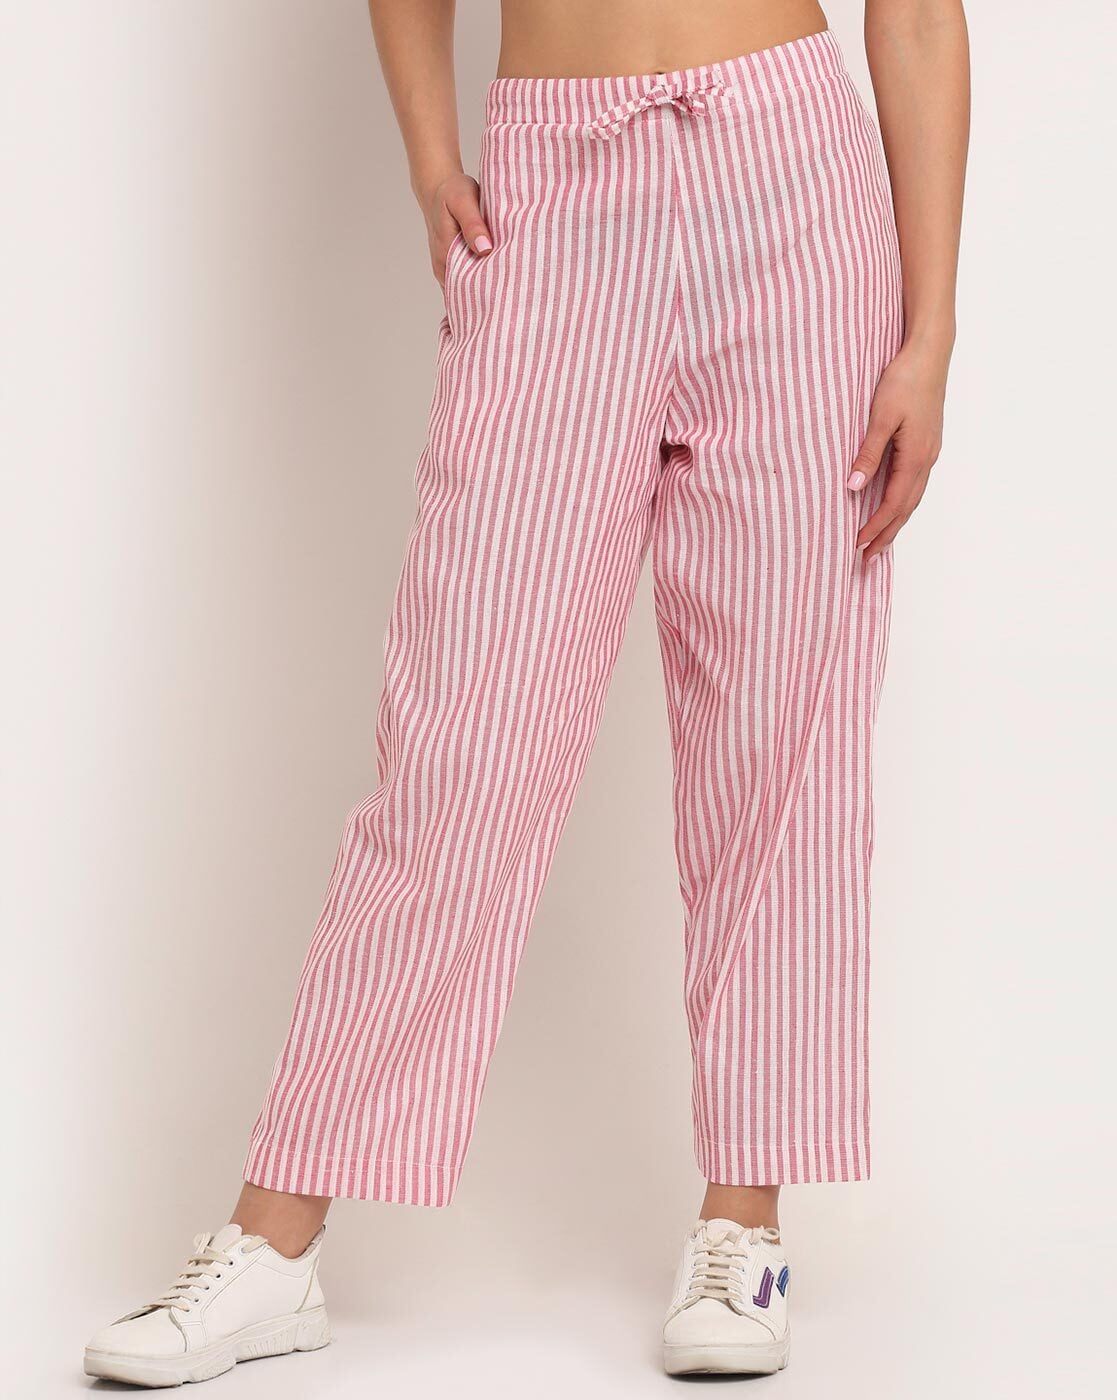 Buy Marie Claire Women Navy  White Original Fit Striped Peg Trousers   Trousers for Women 1968349  Myntra